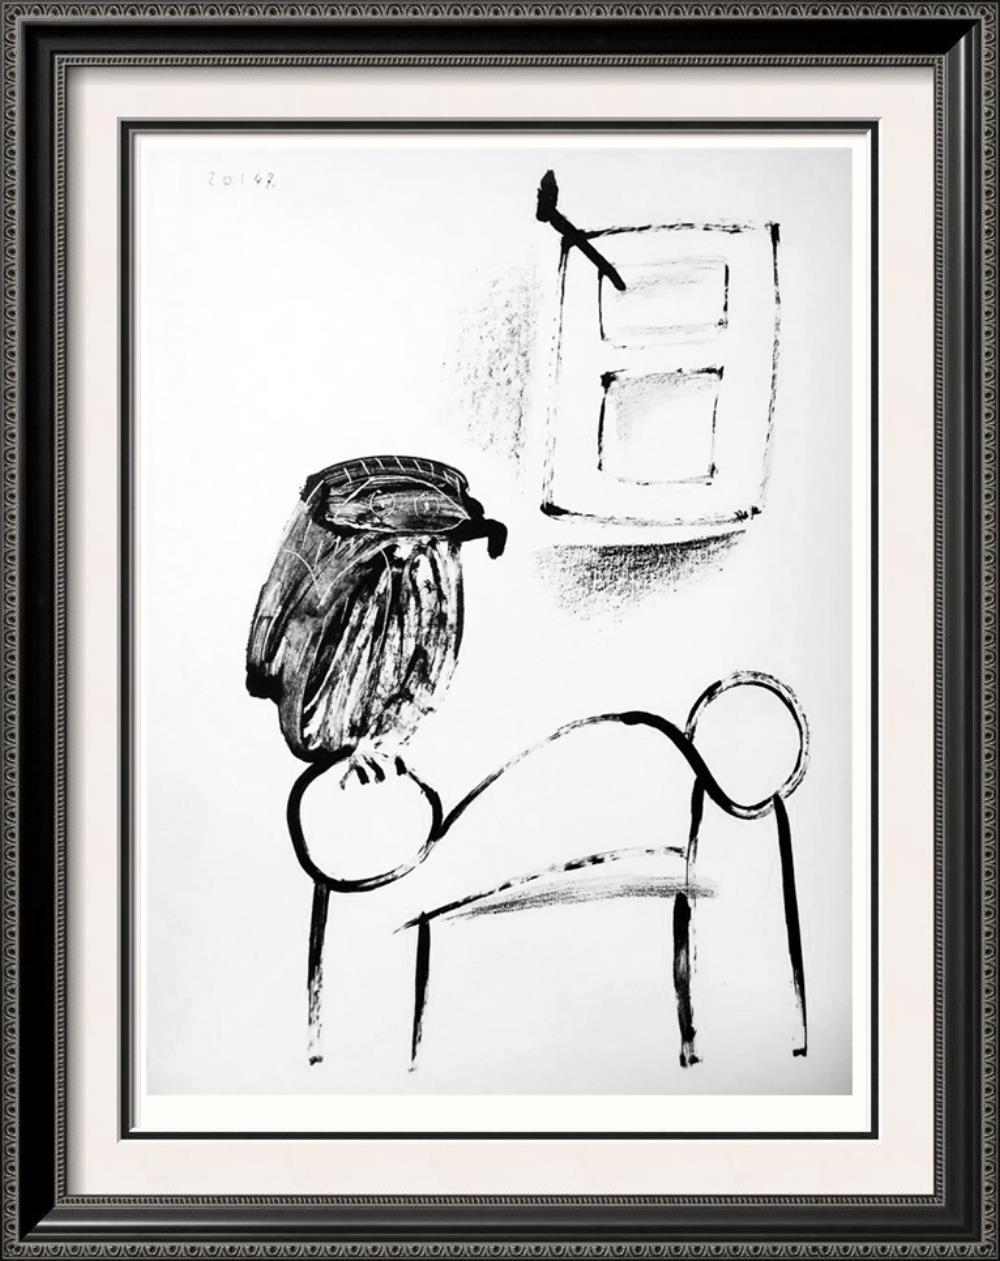 Pablo Picasso Owl on White Background c. 1947 Fine Art Print from Museum Artist